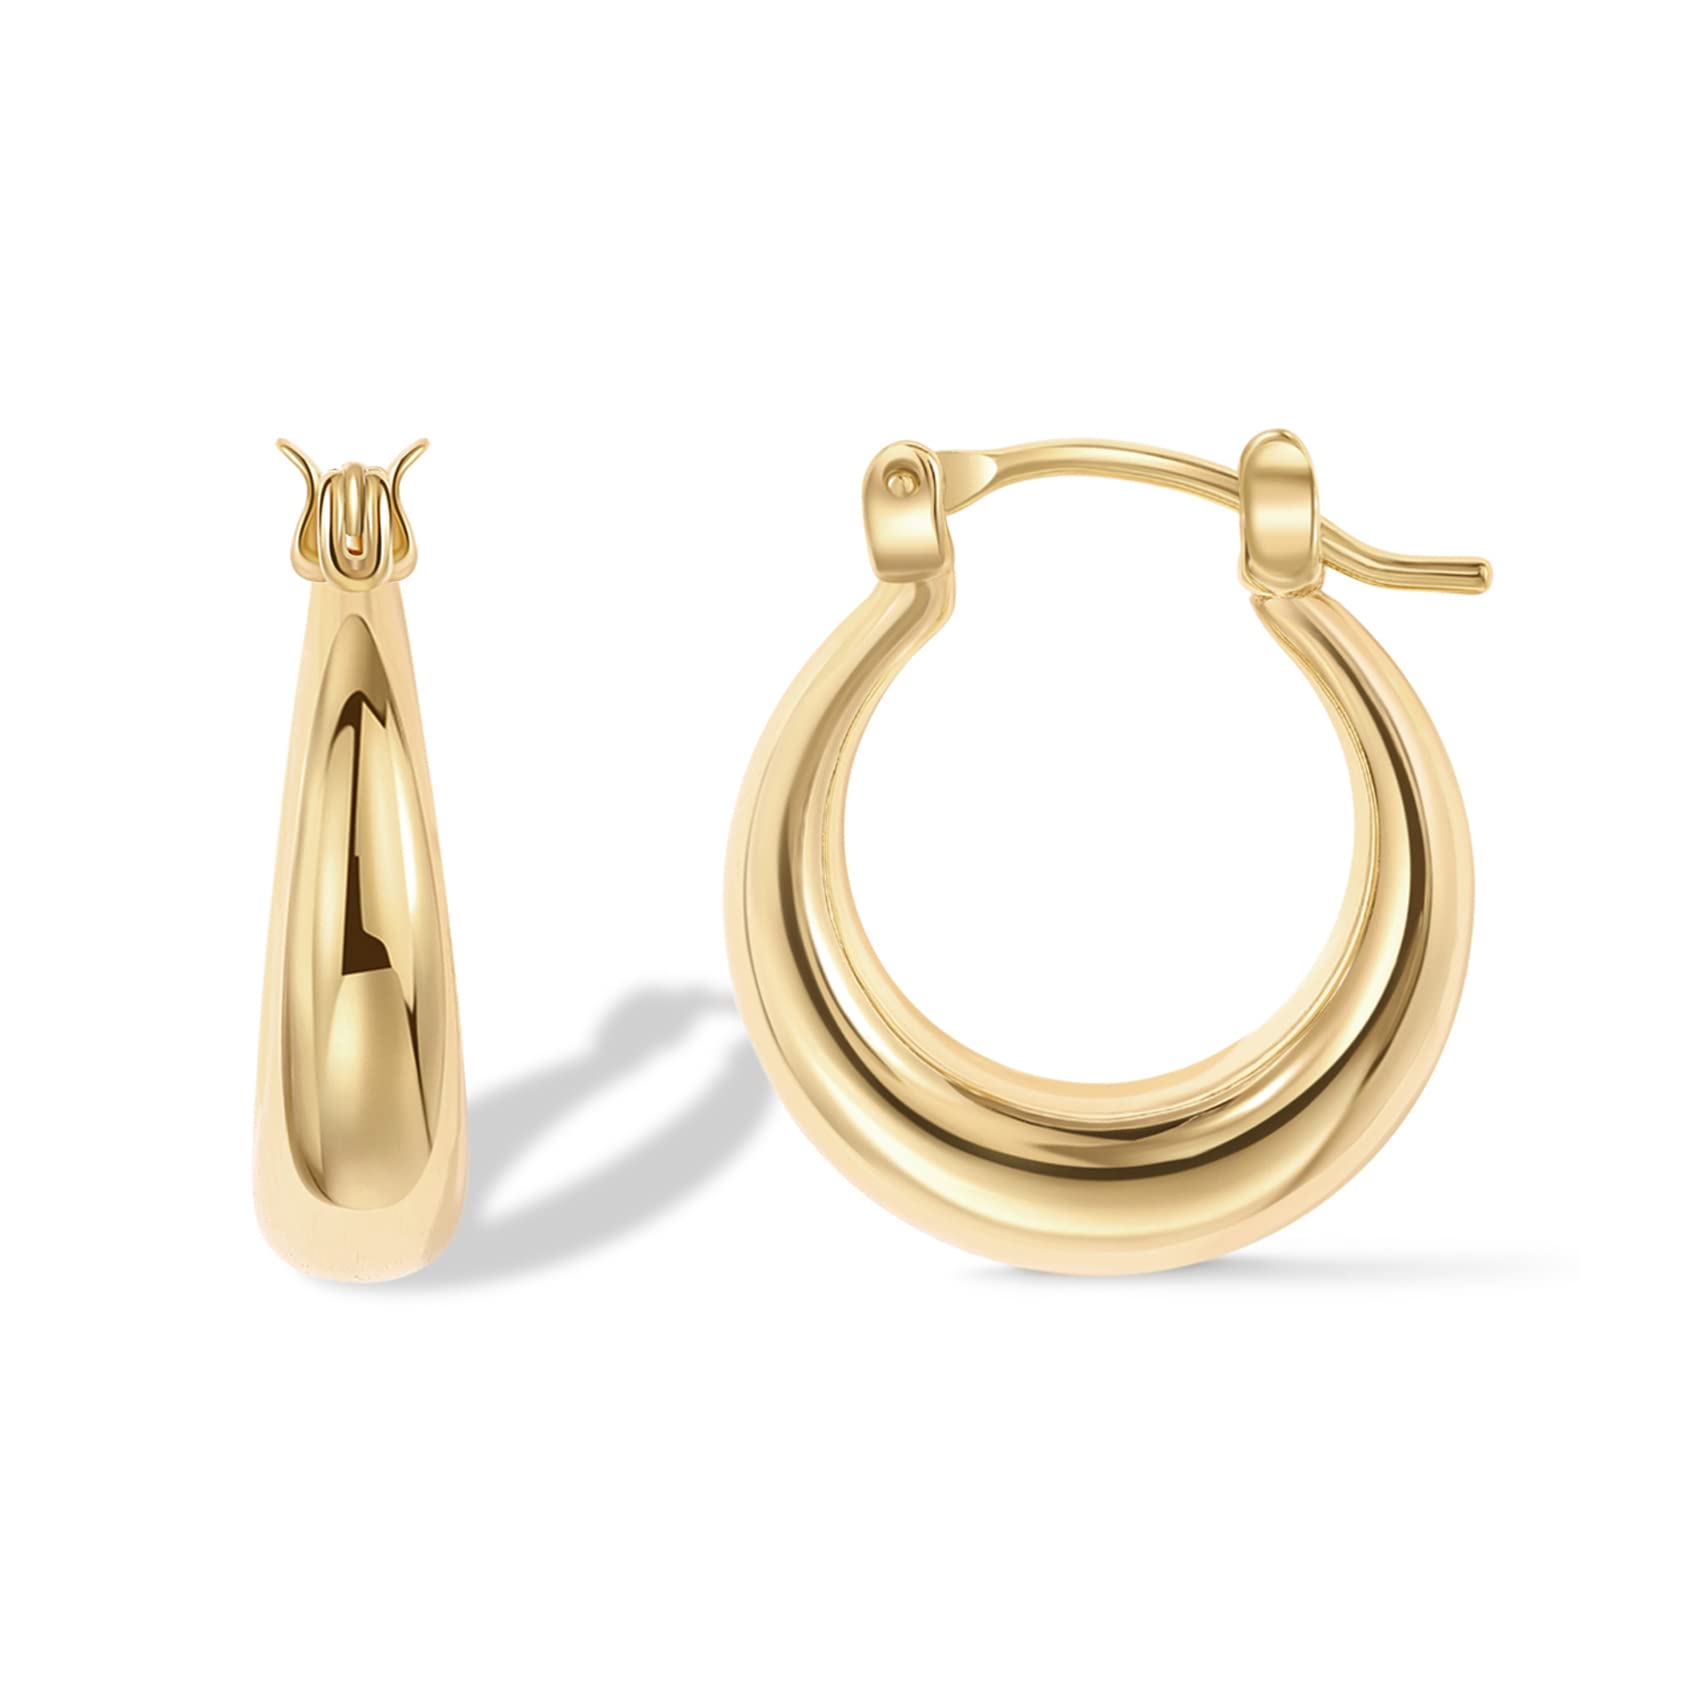 PAVOI 14K Gold Plated Sterling Silver Post Chunky Hoops | Thick Lightweight Gold Hoop Earrings for Women